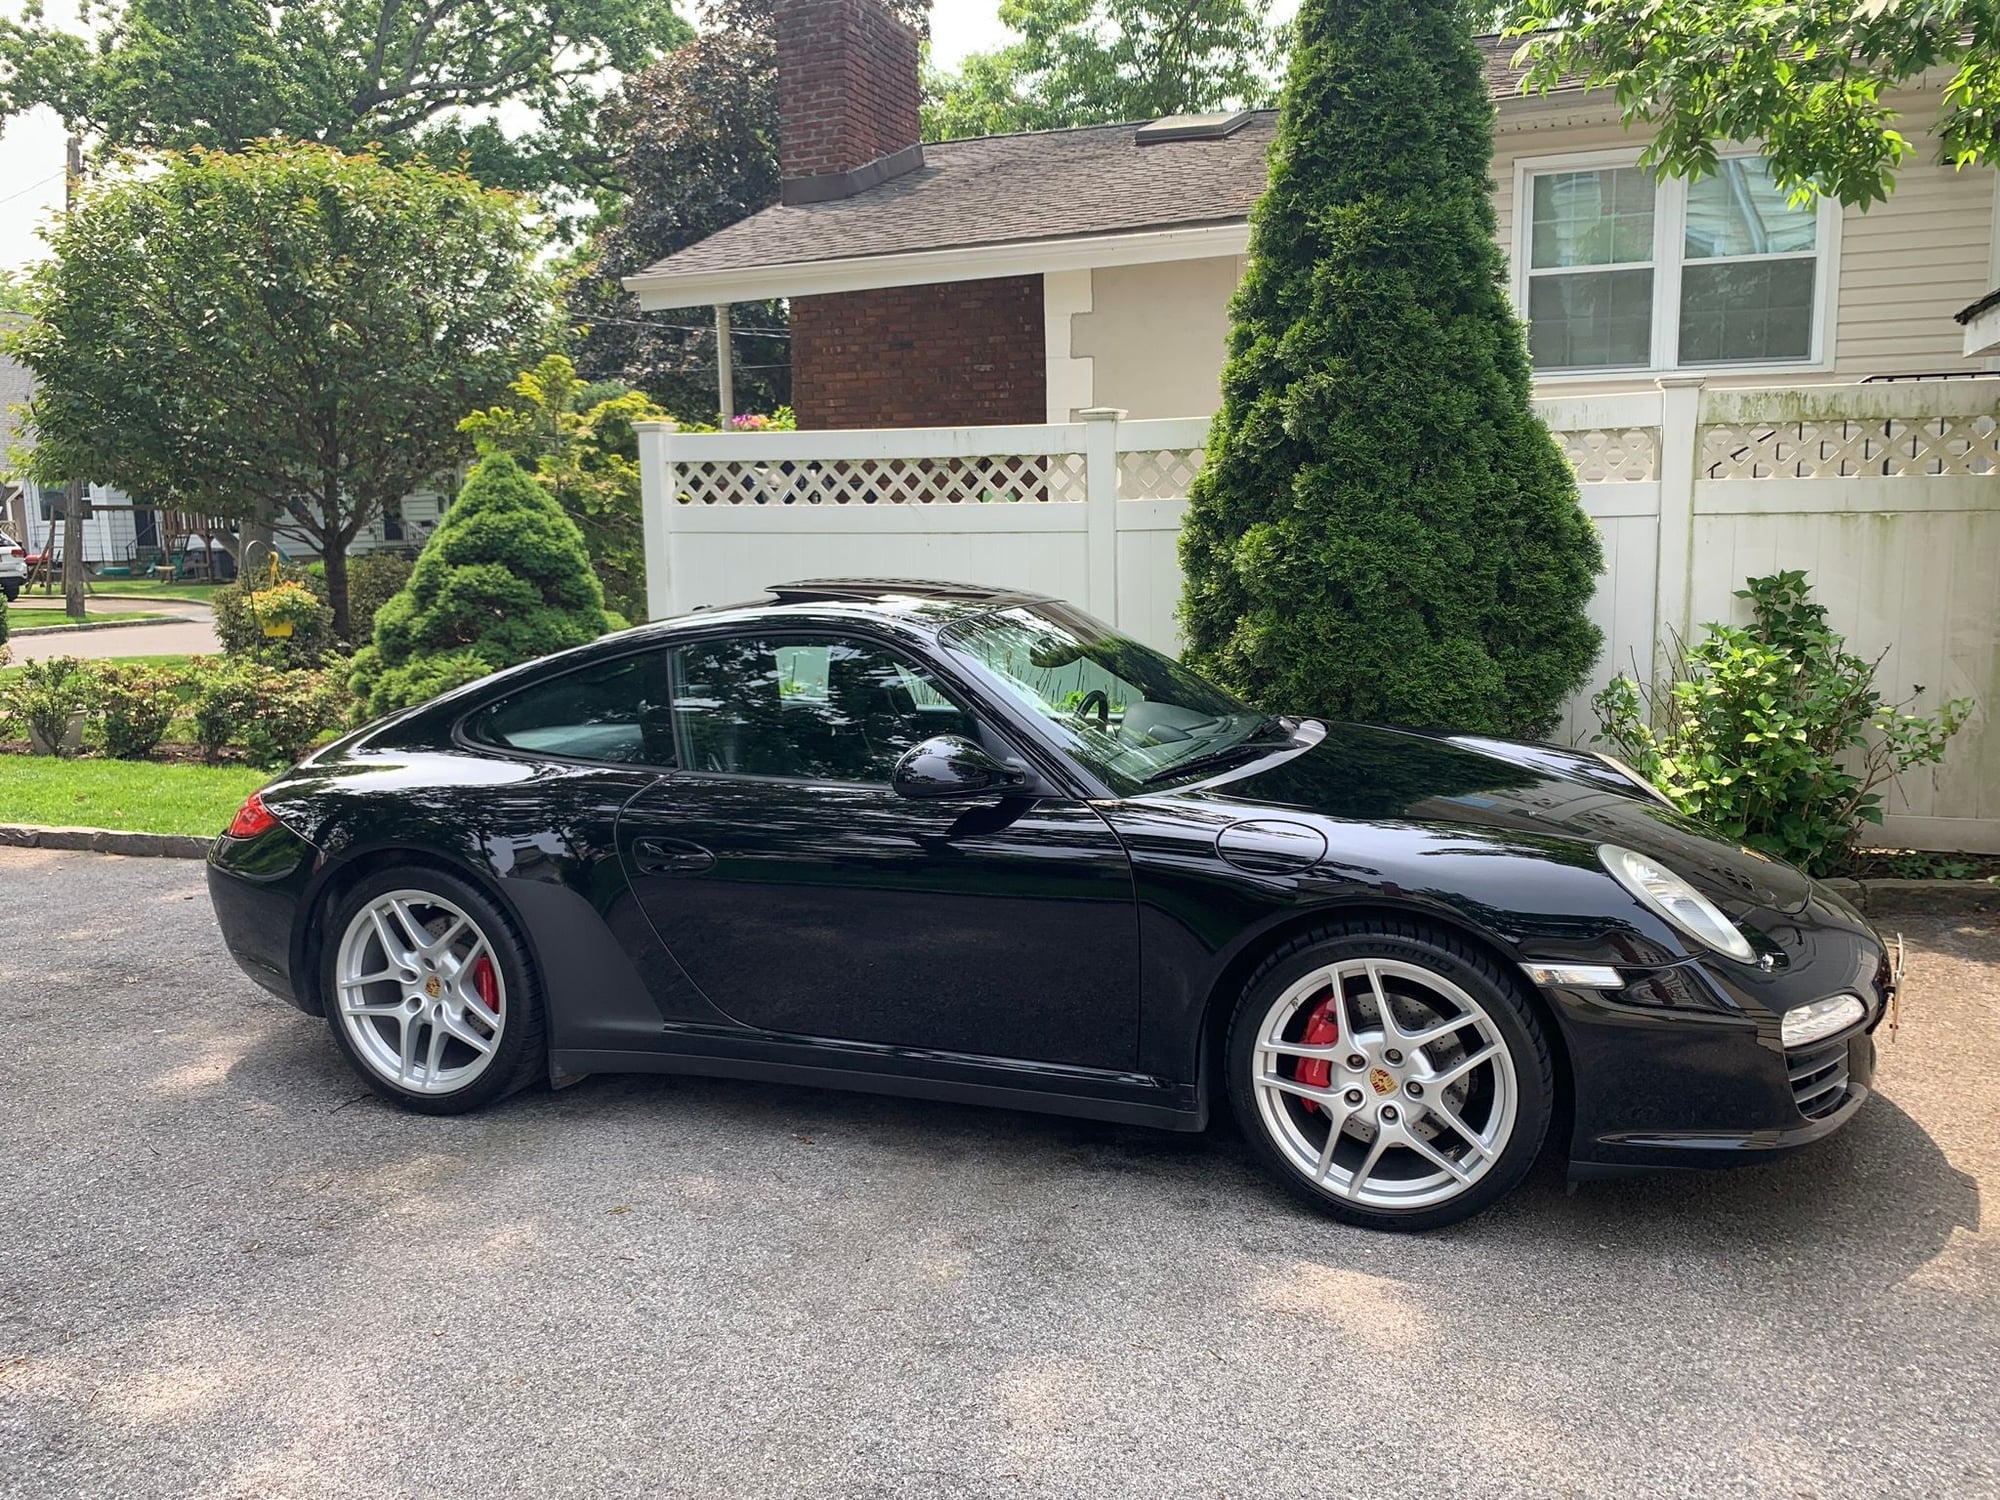 2010 Porsche 911 - 2010 Porsche 911 Carerra 4S (997.2) - Used - VIN WP0AB2A97AS720070 - 73,000 Miles - 6 cyl - 4WD - Automatic - Coupe - Black - Pelham Manor, NY 10803, United States